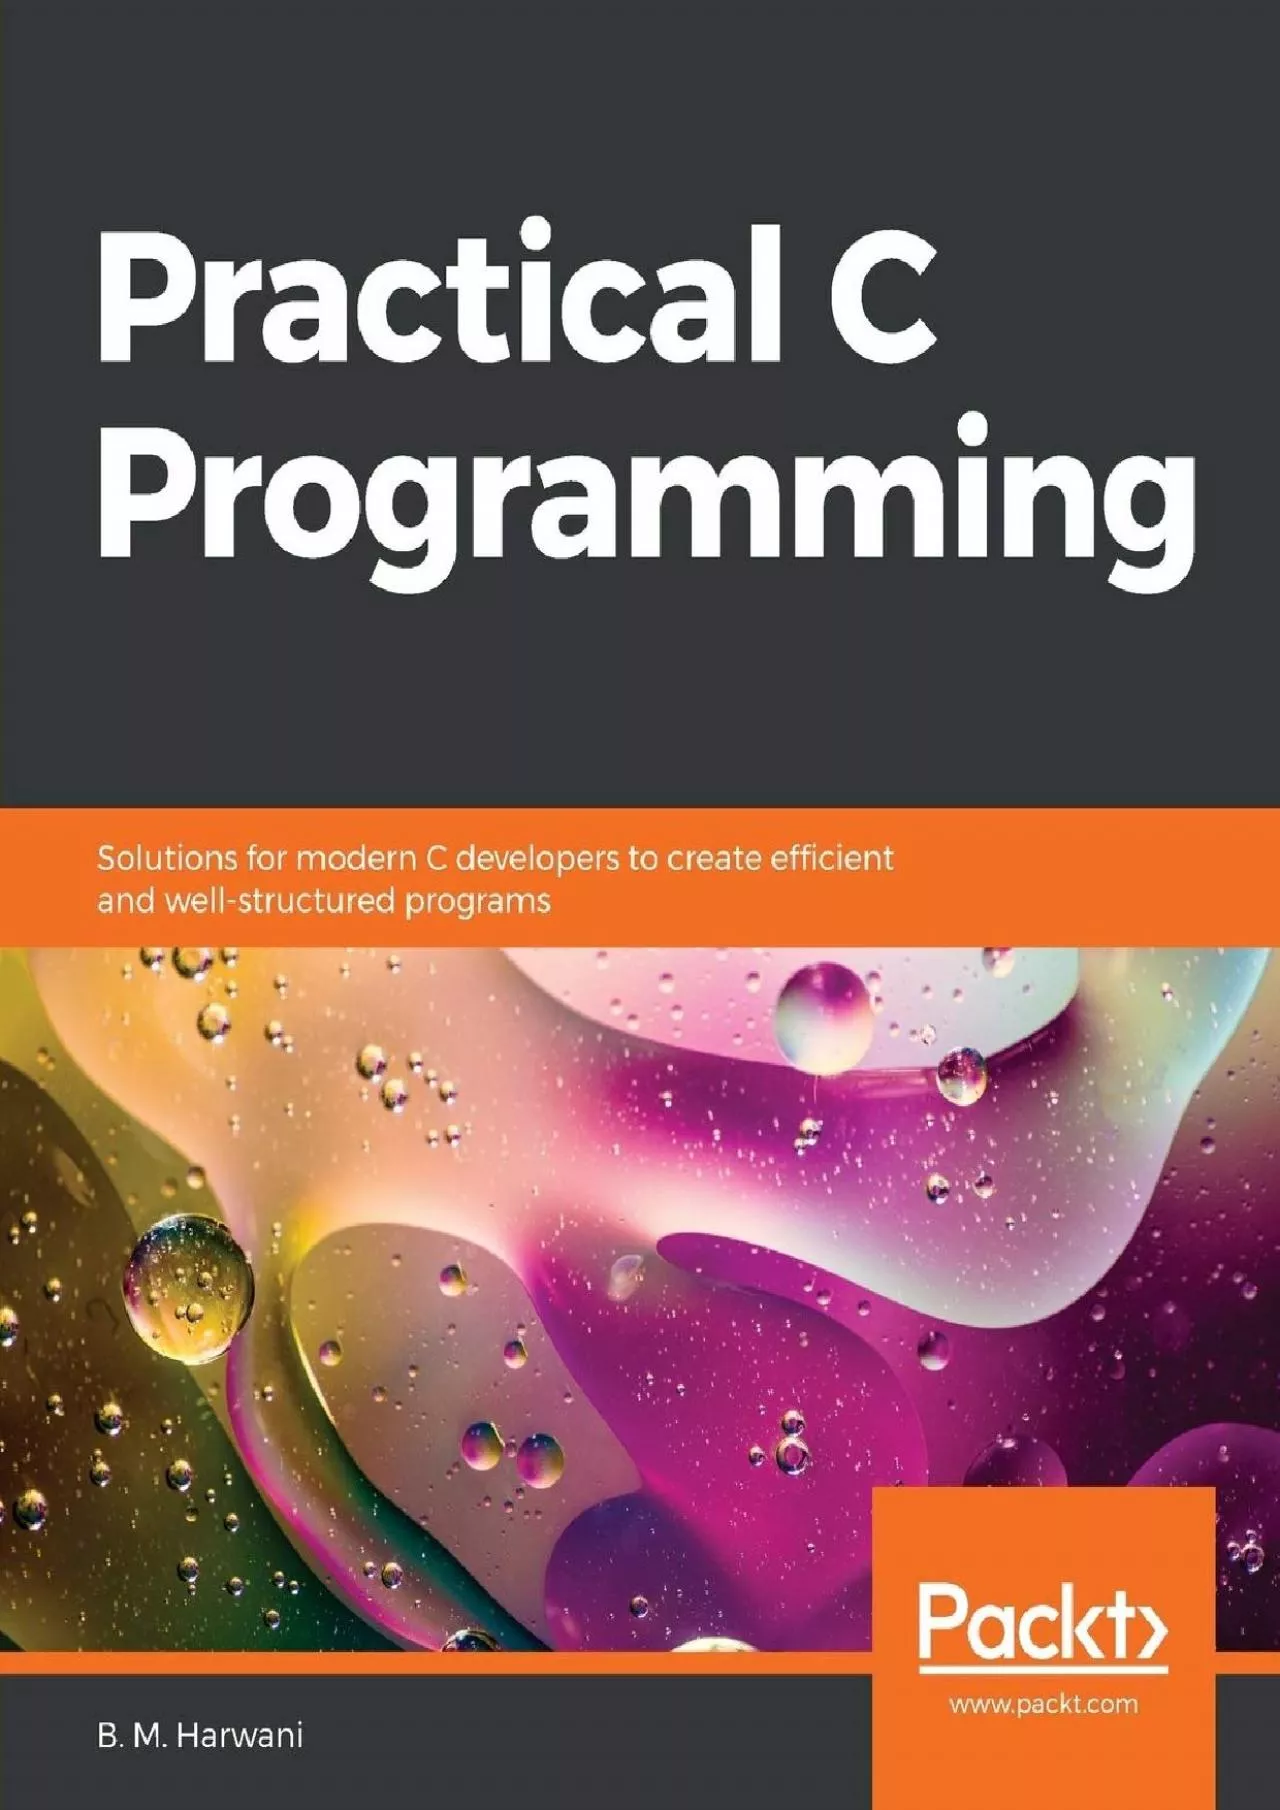 [BEST]-Practical C Programming: Solutions for modern C developers to create efficient